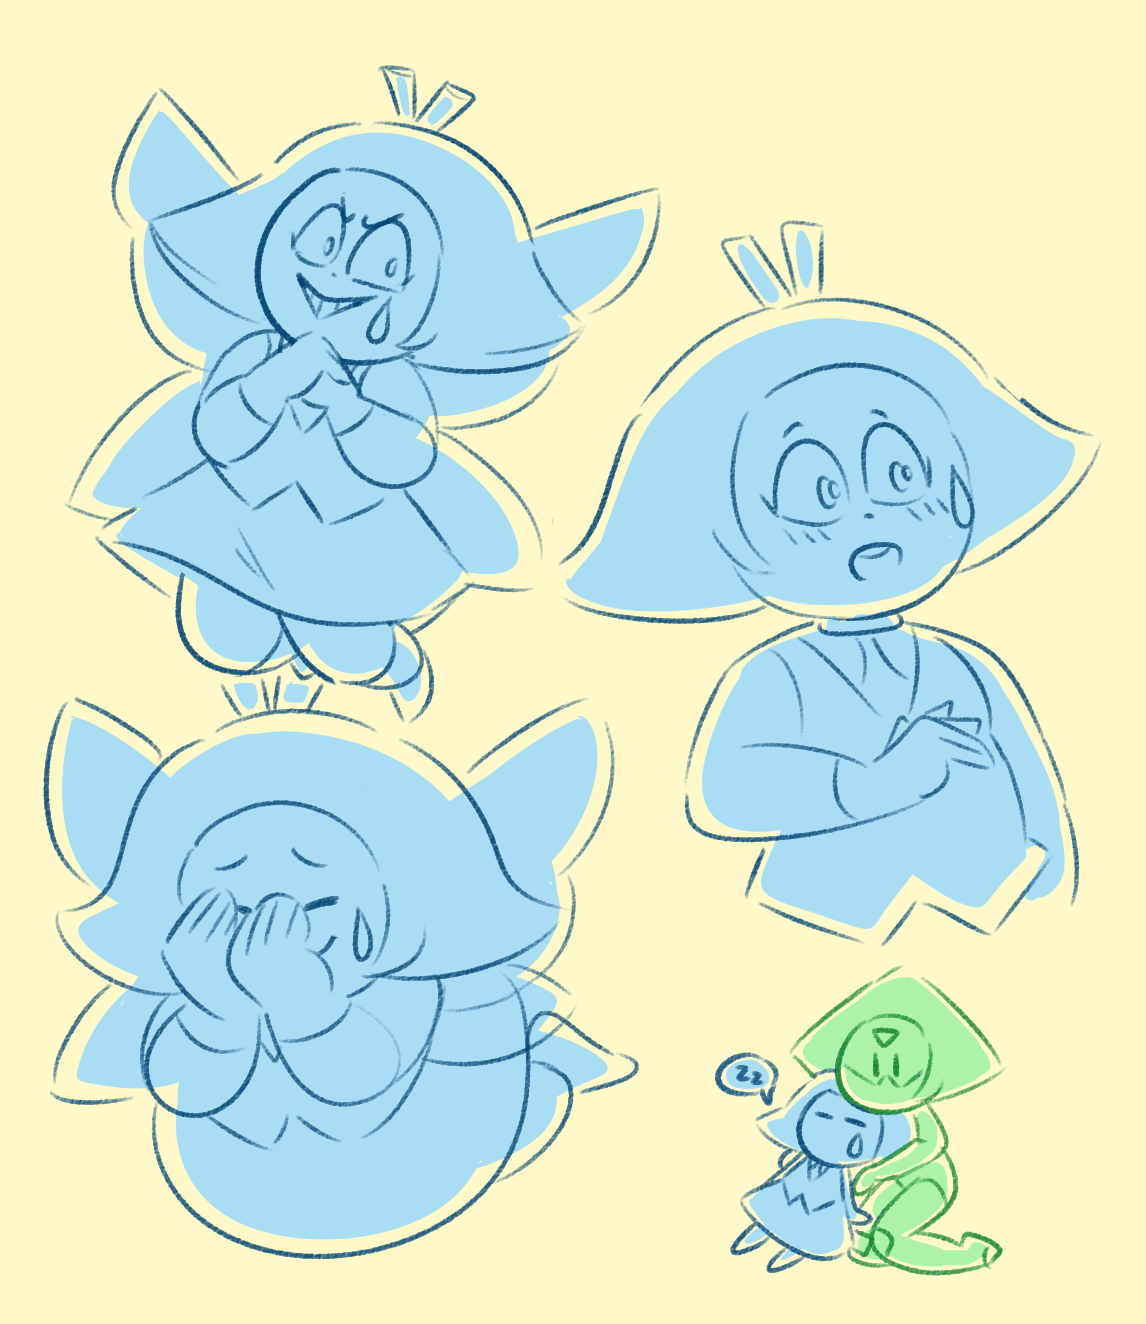 Gosh, i haven’t posted any art in a while! Sorry about that… Some Aquas from today with a bonus lil Peri!